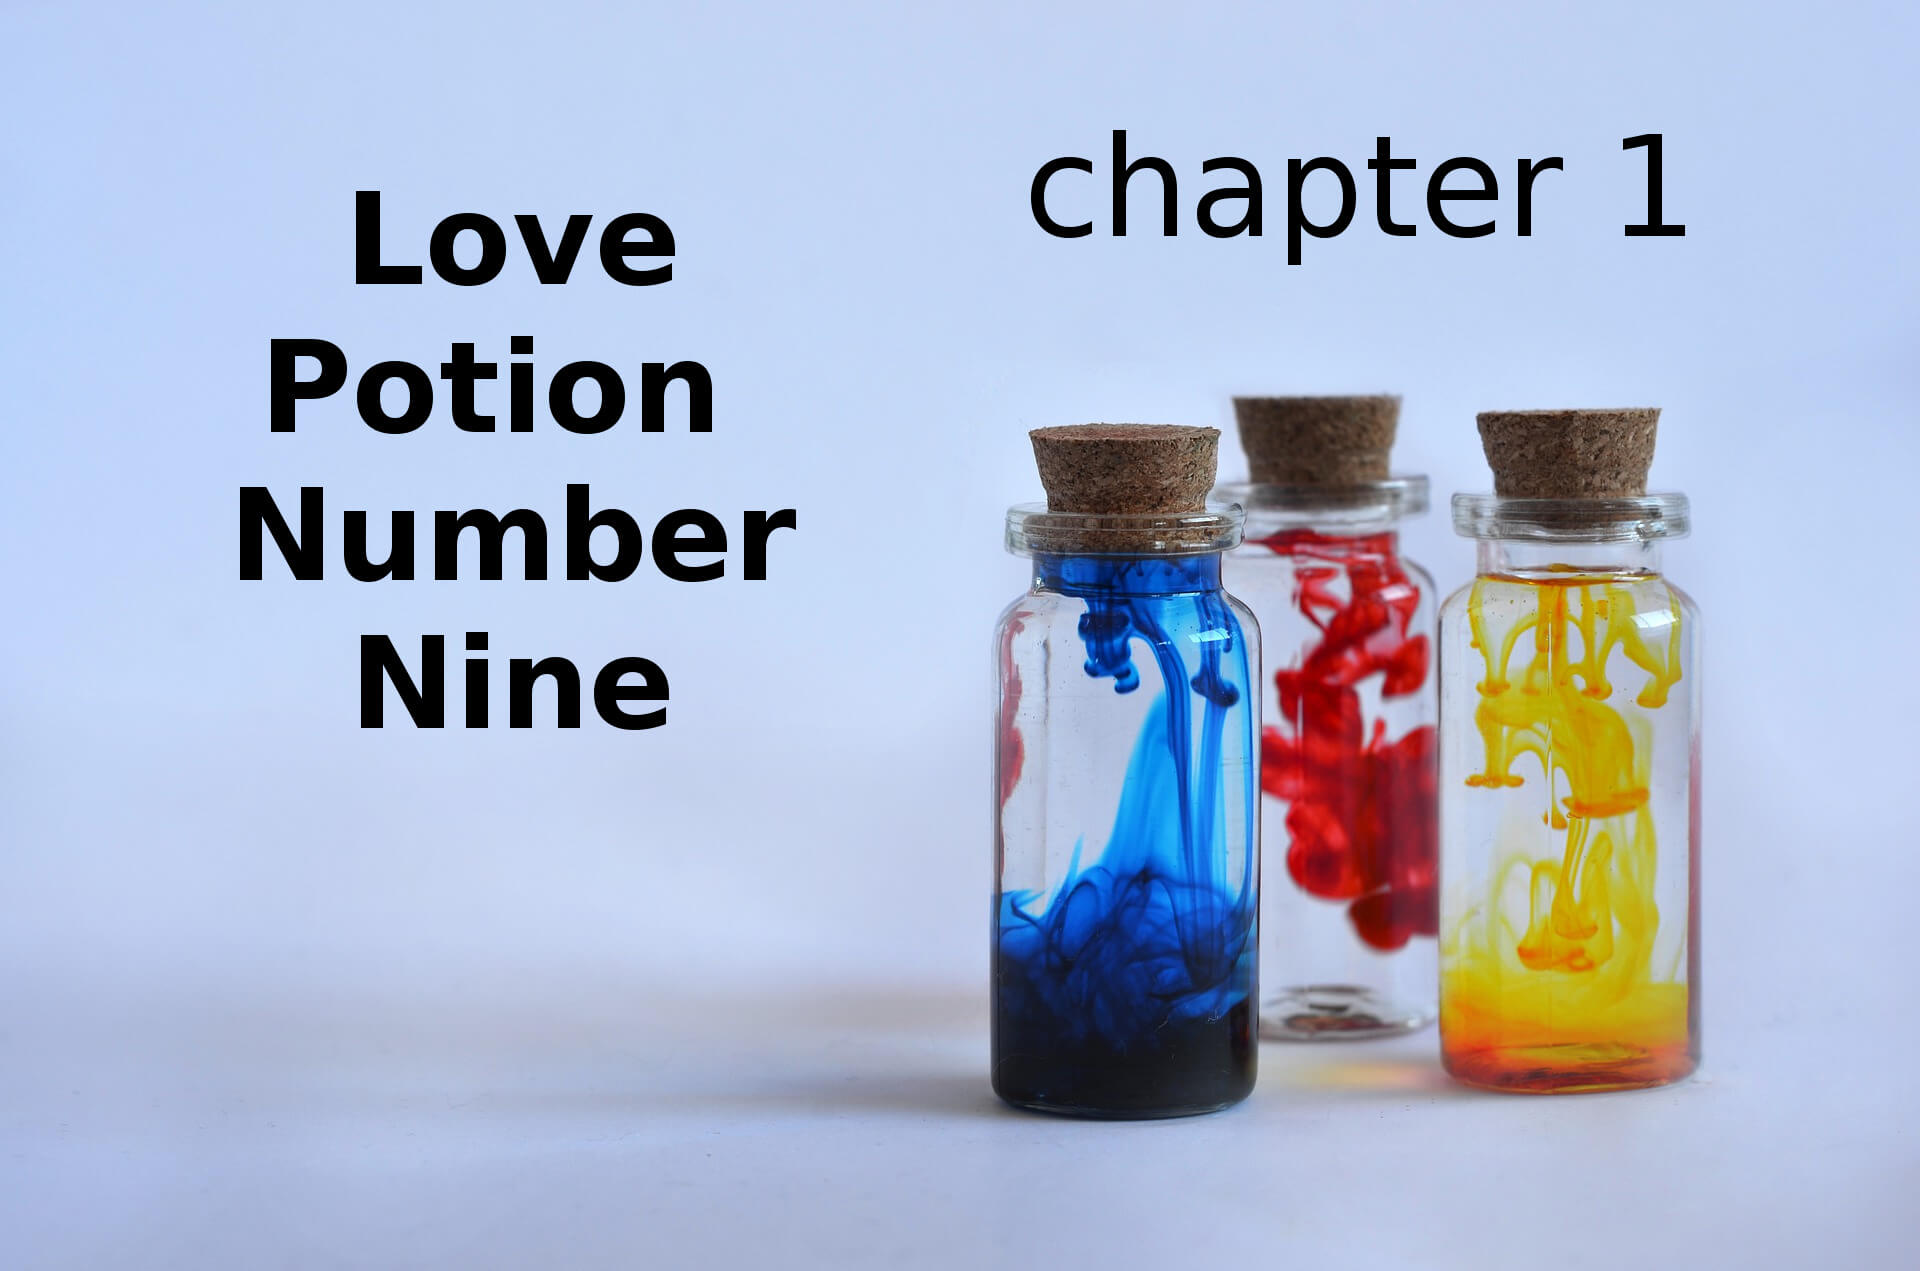 Love Potion Number Nine chapter 1 Zorro fanfiction